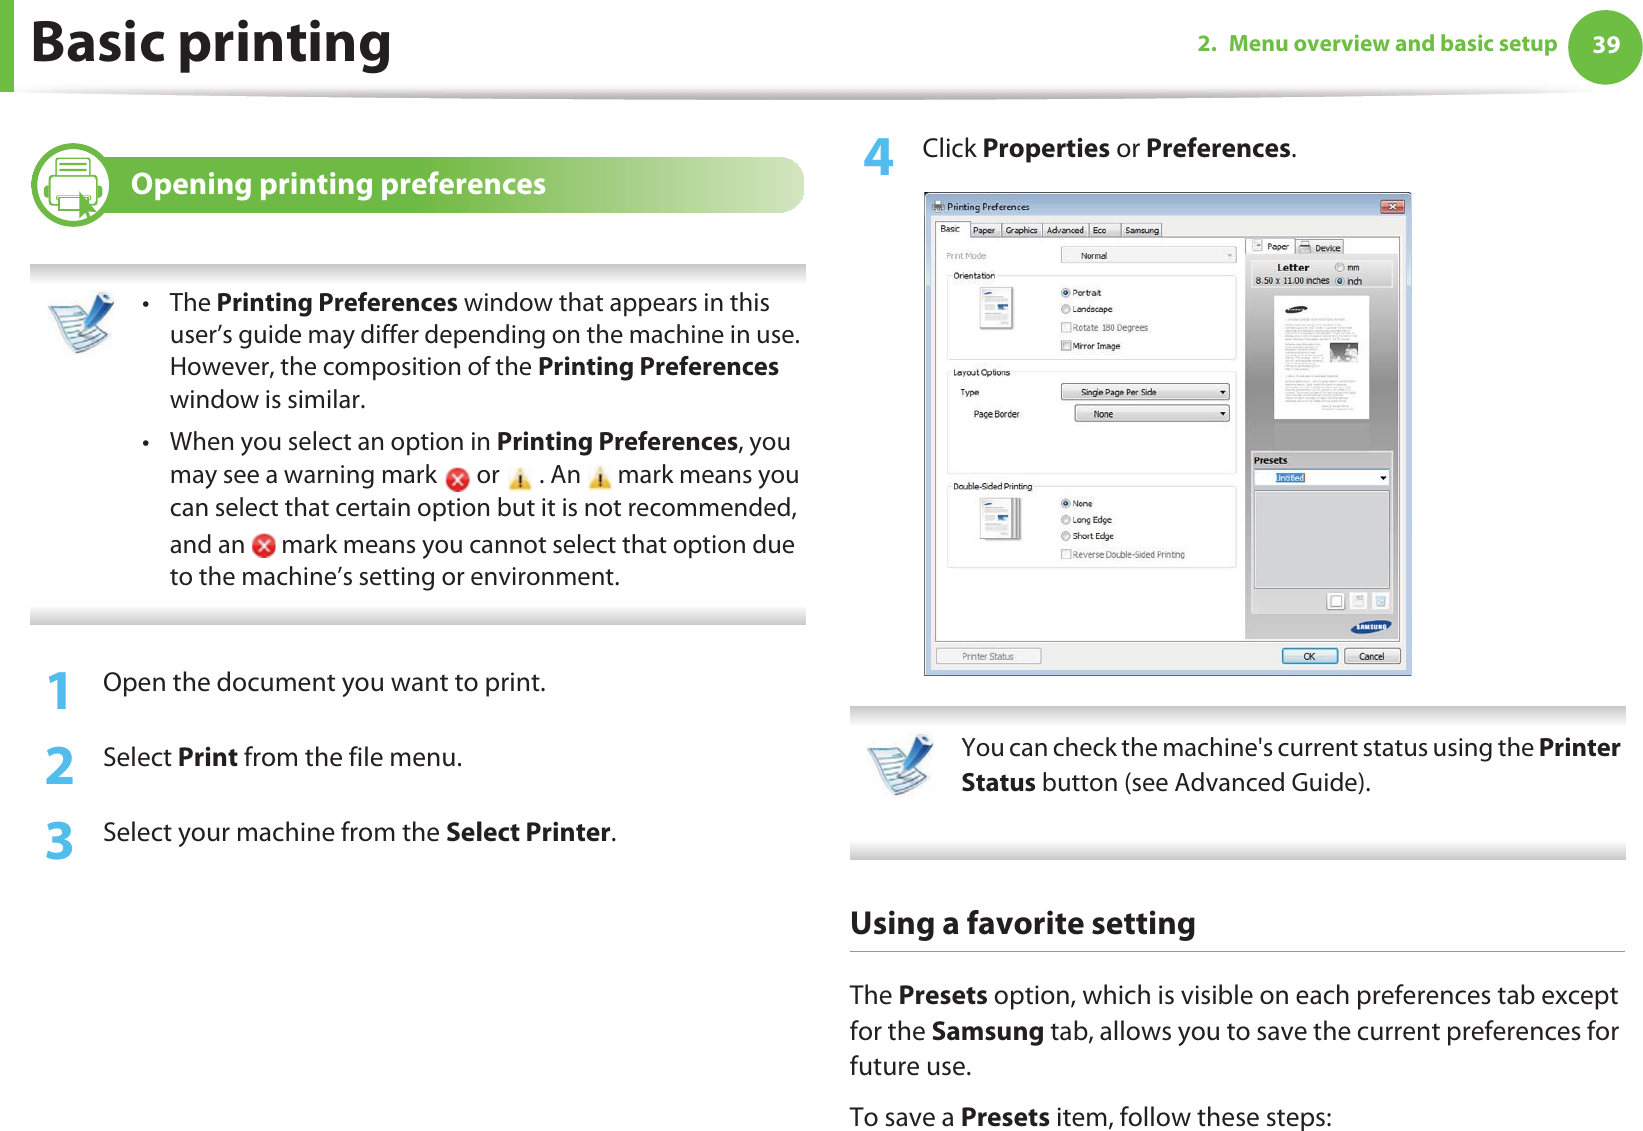 Basic printing 392. Menu overview and basic setup8 Opening printing preferences •The Printing Preferences window that appears in this user’s guide may differ depending on the machine in use. However, the composition of the Printing Preferences window is similar.• When you select an option in Printing Preferences, you may see a warning mark   or   . An   mark means you can select that certain option but it is not recommended, and an   mark means you cannot select that option due to the machine’s setting or environment. 1Open the document you want to print.2  Select Print from the file menu.3  Select your machine from the Select Printer. 4  Click Properties or Preferences.  You can check the machine&apos;s current status using the Printer Status button (see Advanced Guide). Using a favorite settingThe Presets option, which is visible on each preferences tab except for the Samsung tab, allows you to save the current preferences for future use.To save a Presets item, follow these steps: